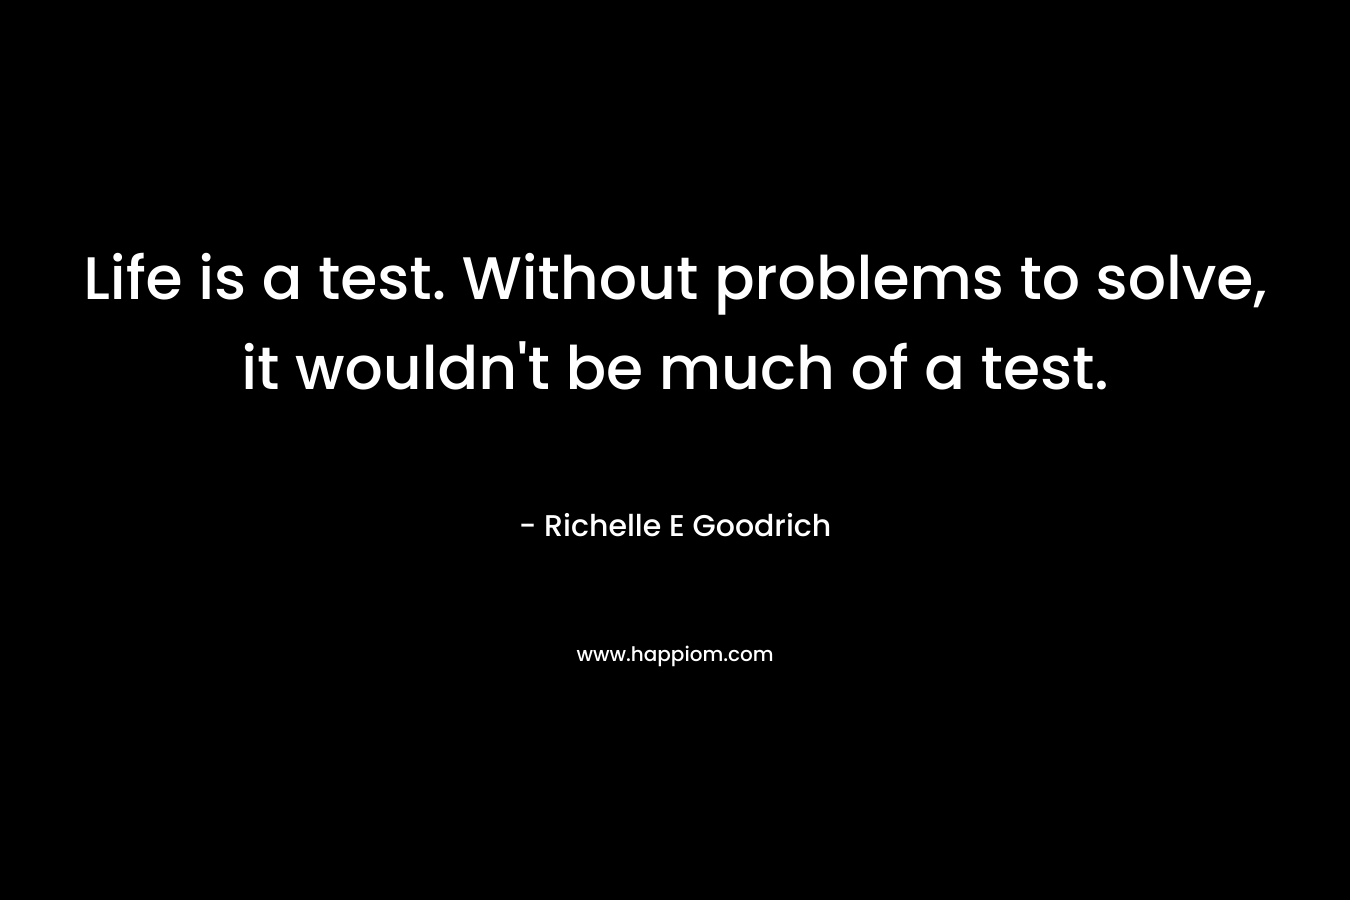 Life is a test. Without problems to solve, it wouldn't be much of a test.